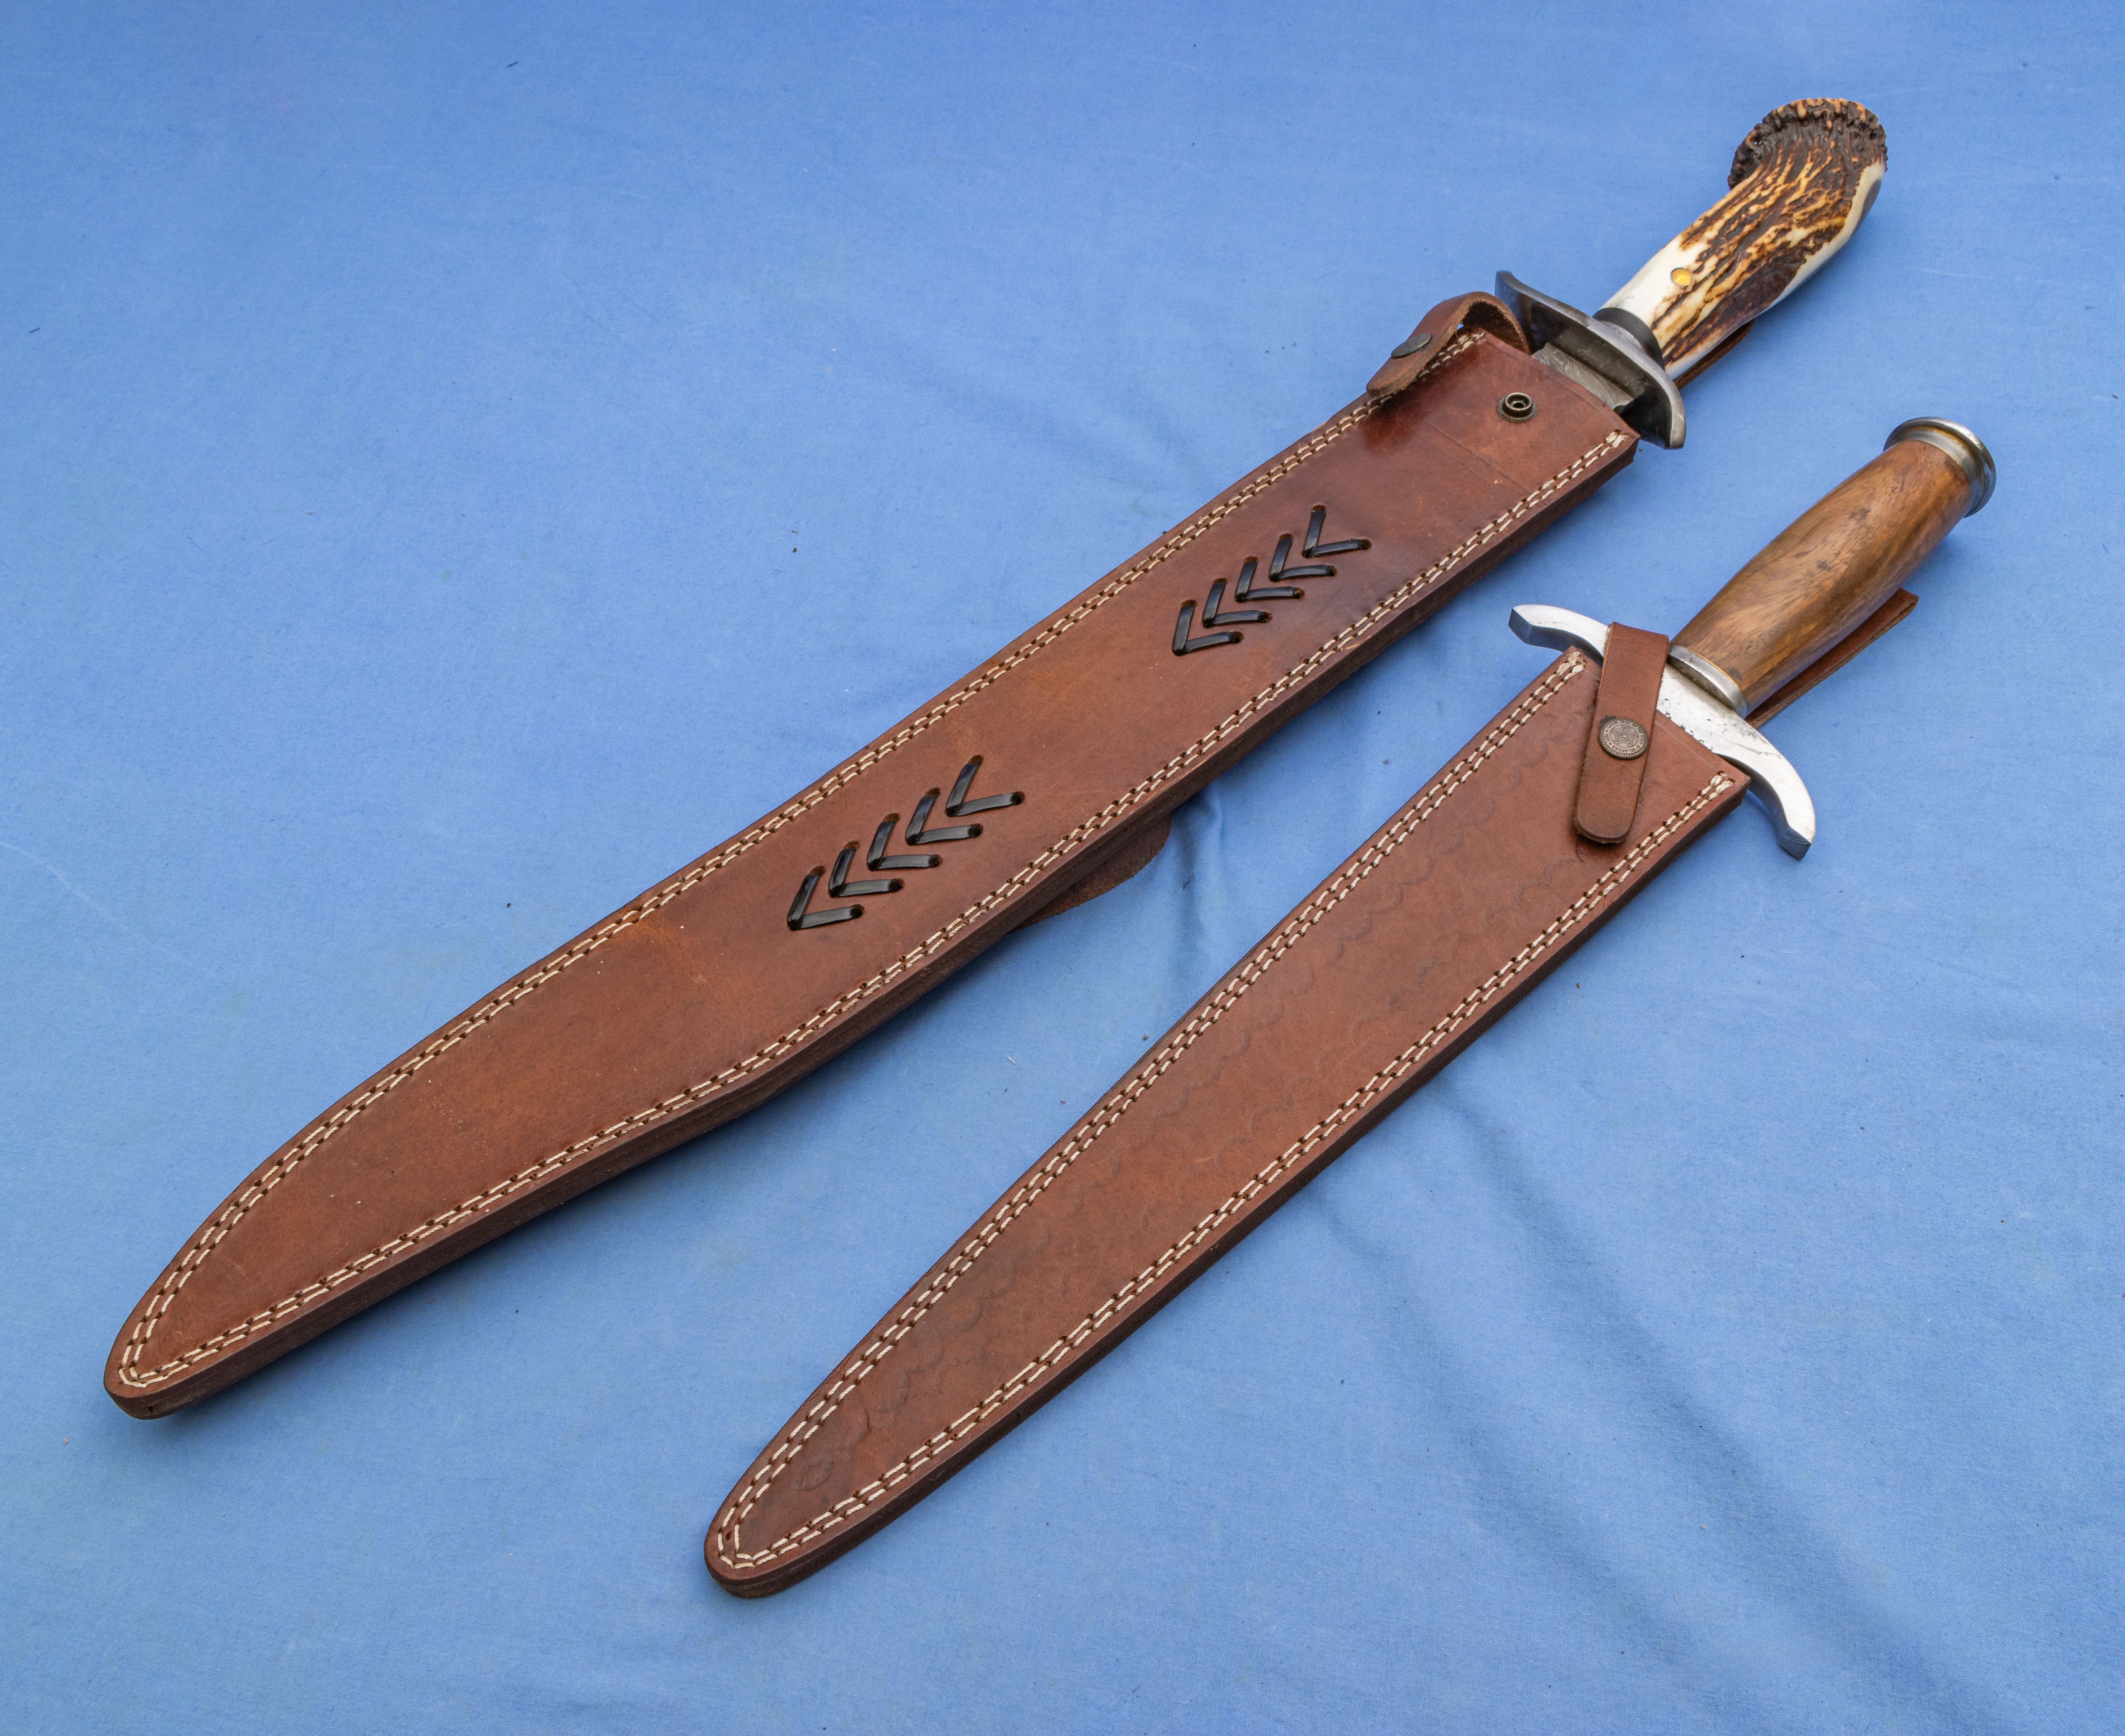 Two Damascus steel knives with leather sheaths - Image 2 of 2